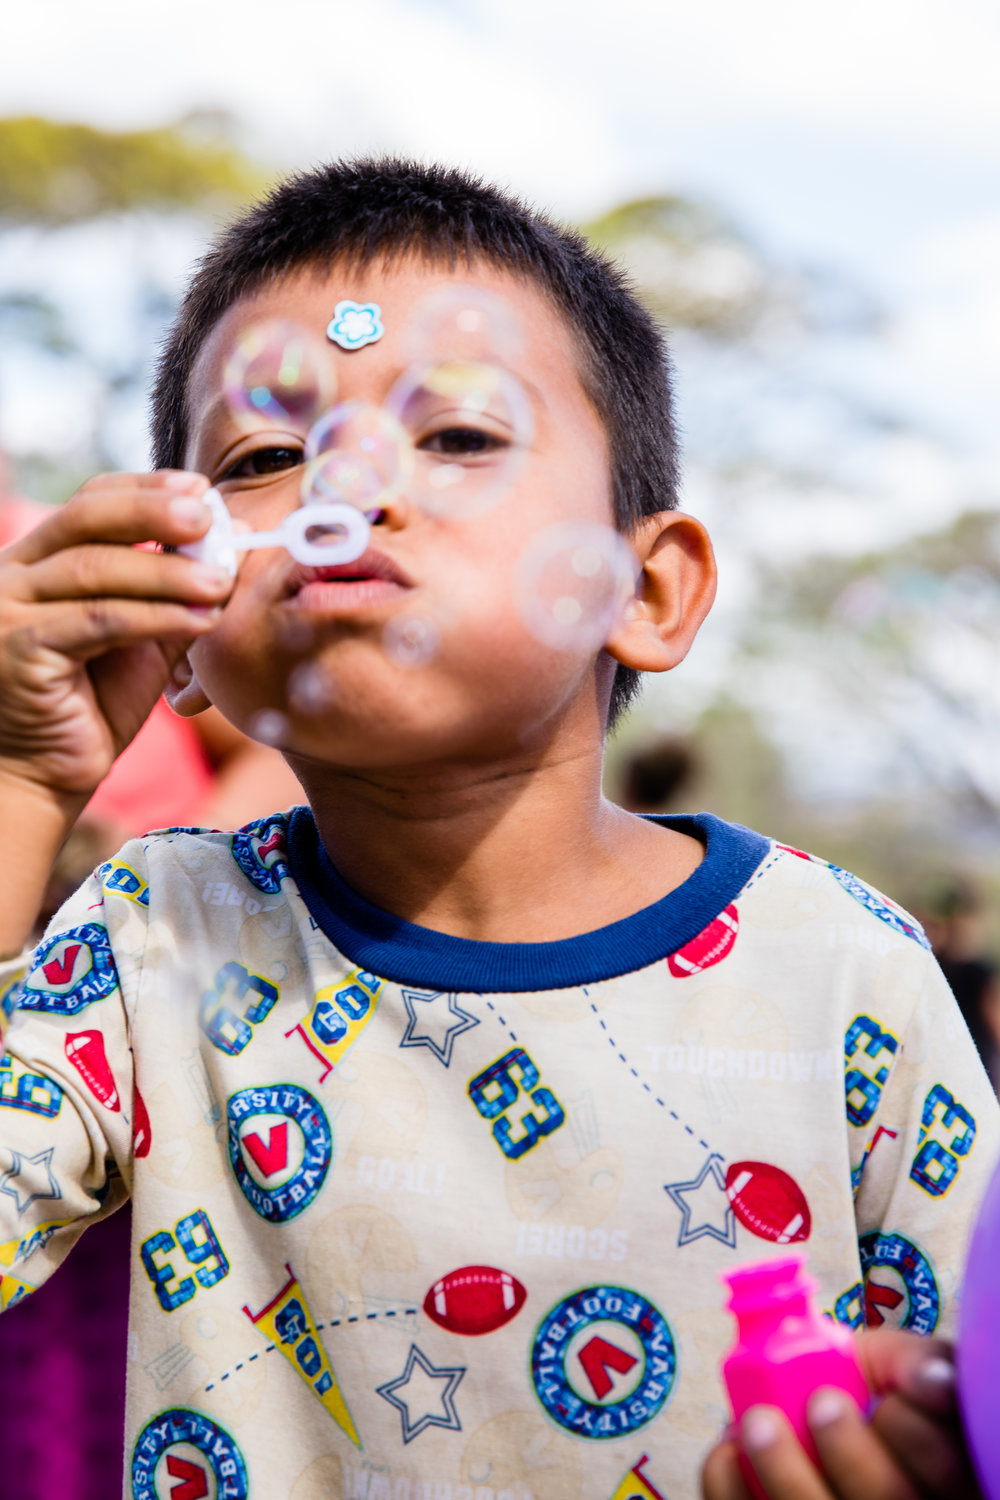 boy from Nicaragua playing with bubbles, blowing at camera